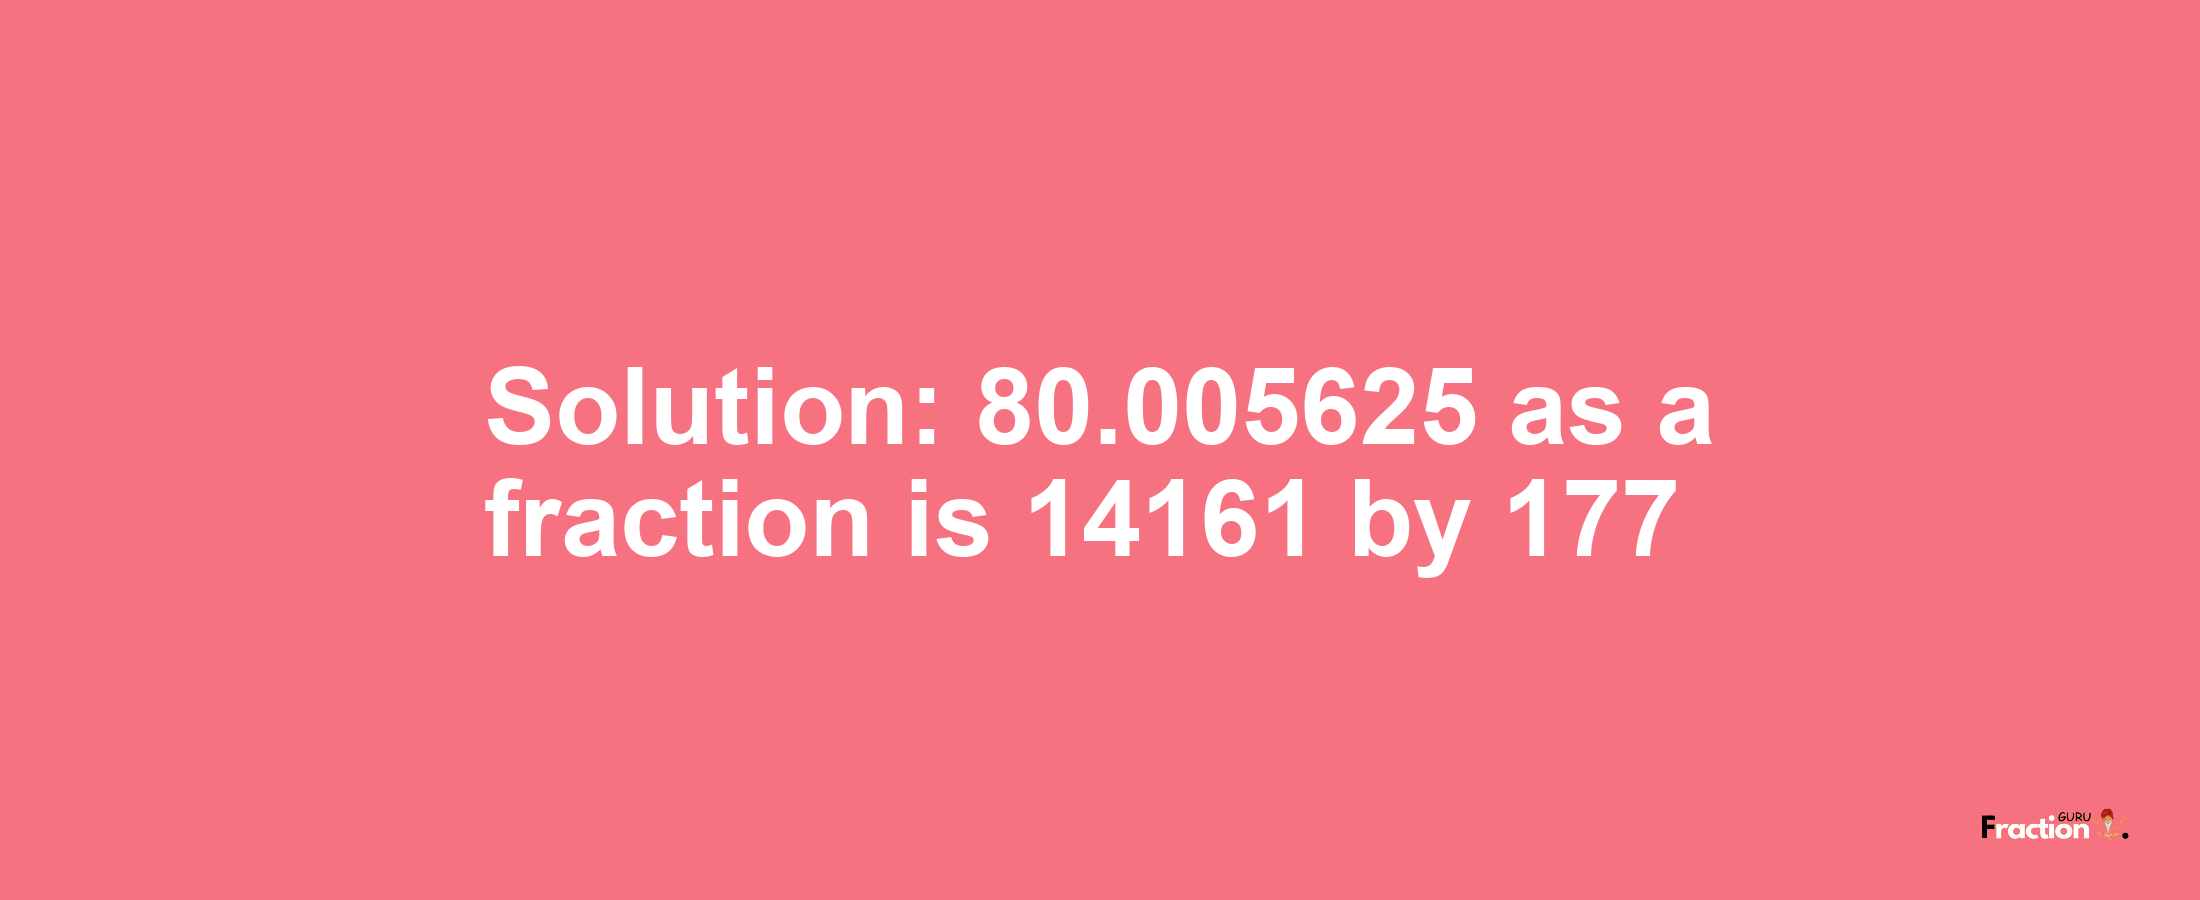 Solution:80.005625 as a fraction is 14161/177